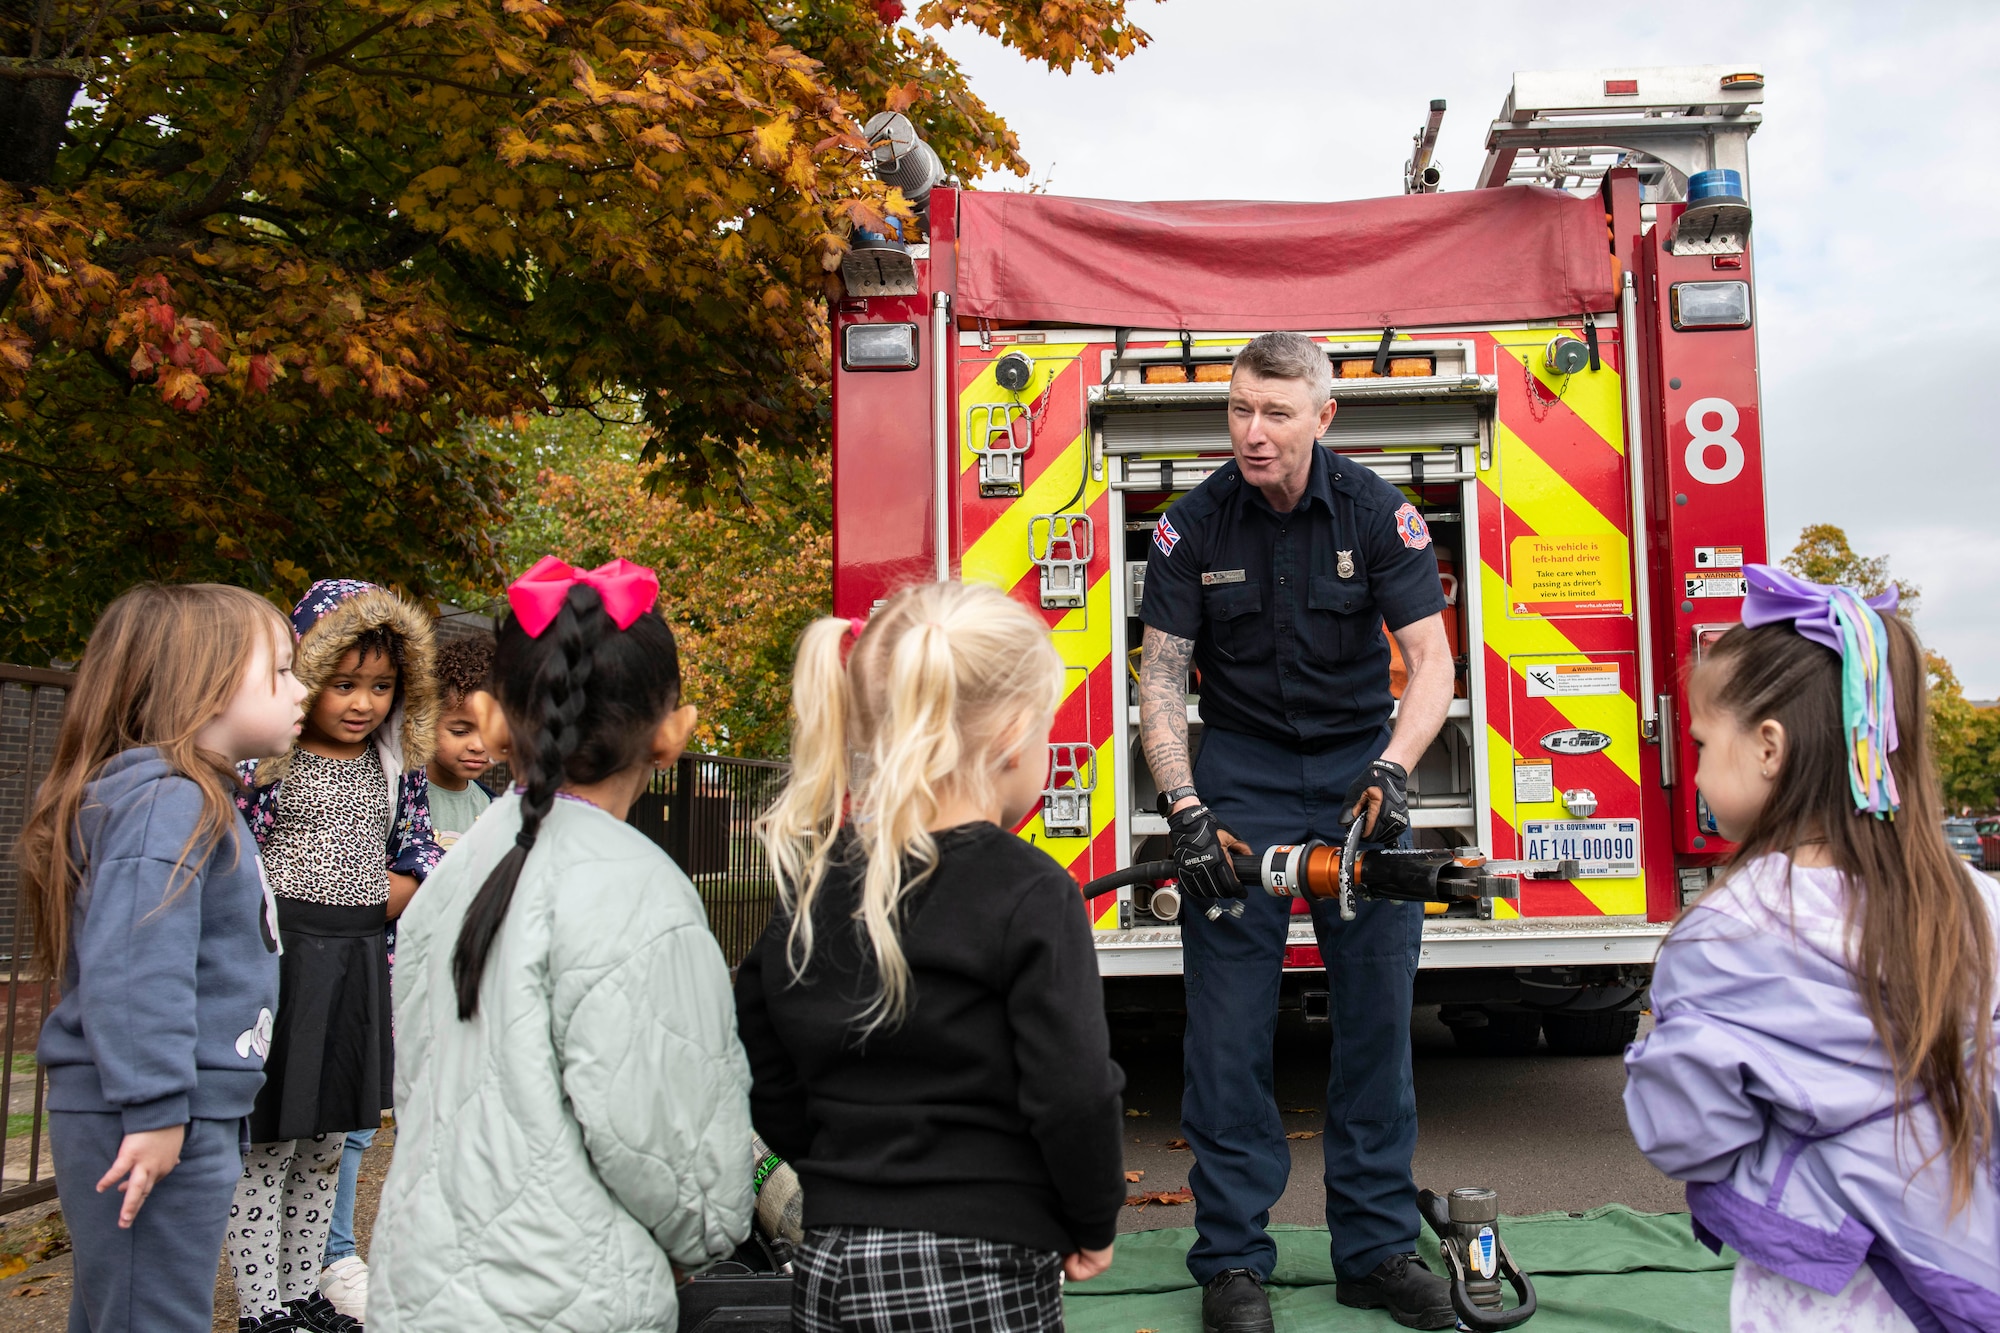 Stephen Poore, 423d Civil Engineer Squadron firefighter, shows RAF Alconbury Elementary School students the equipment that firefighters use, at RAF Alconbury, England, Oct. 13, 2022. This demonstration was a part of Fire Prevention Week and in which firefighters from the 423d CES educated Airmen and family members on proper fire safety habits. (U.S. Air Force photo by Senior Airman Jason W. Cochran)